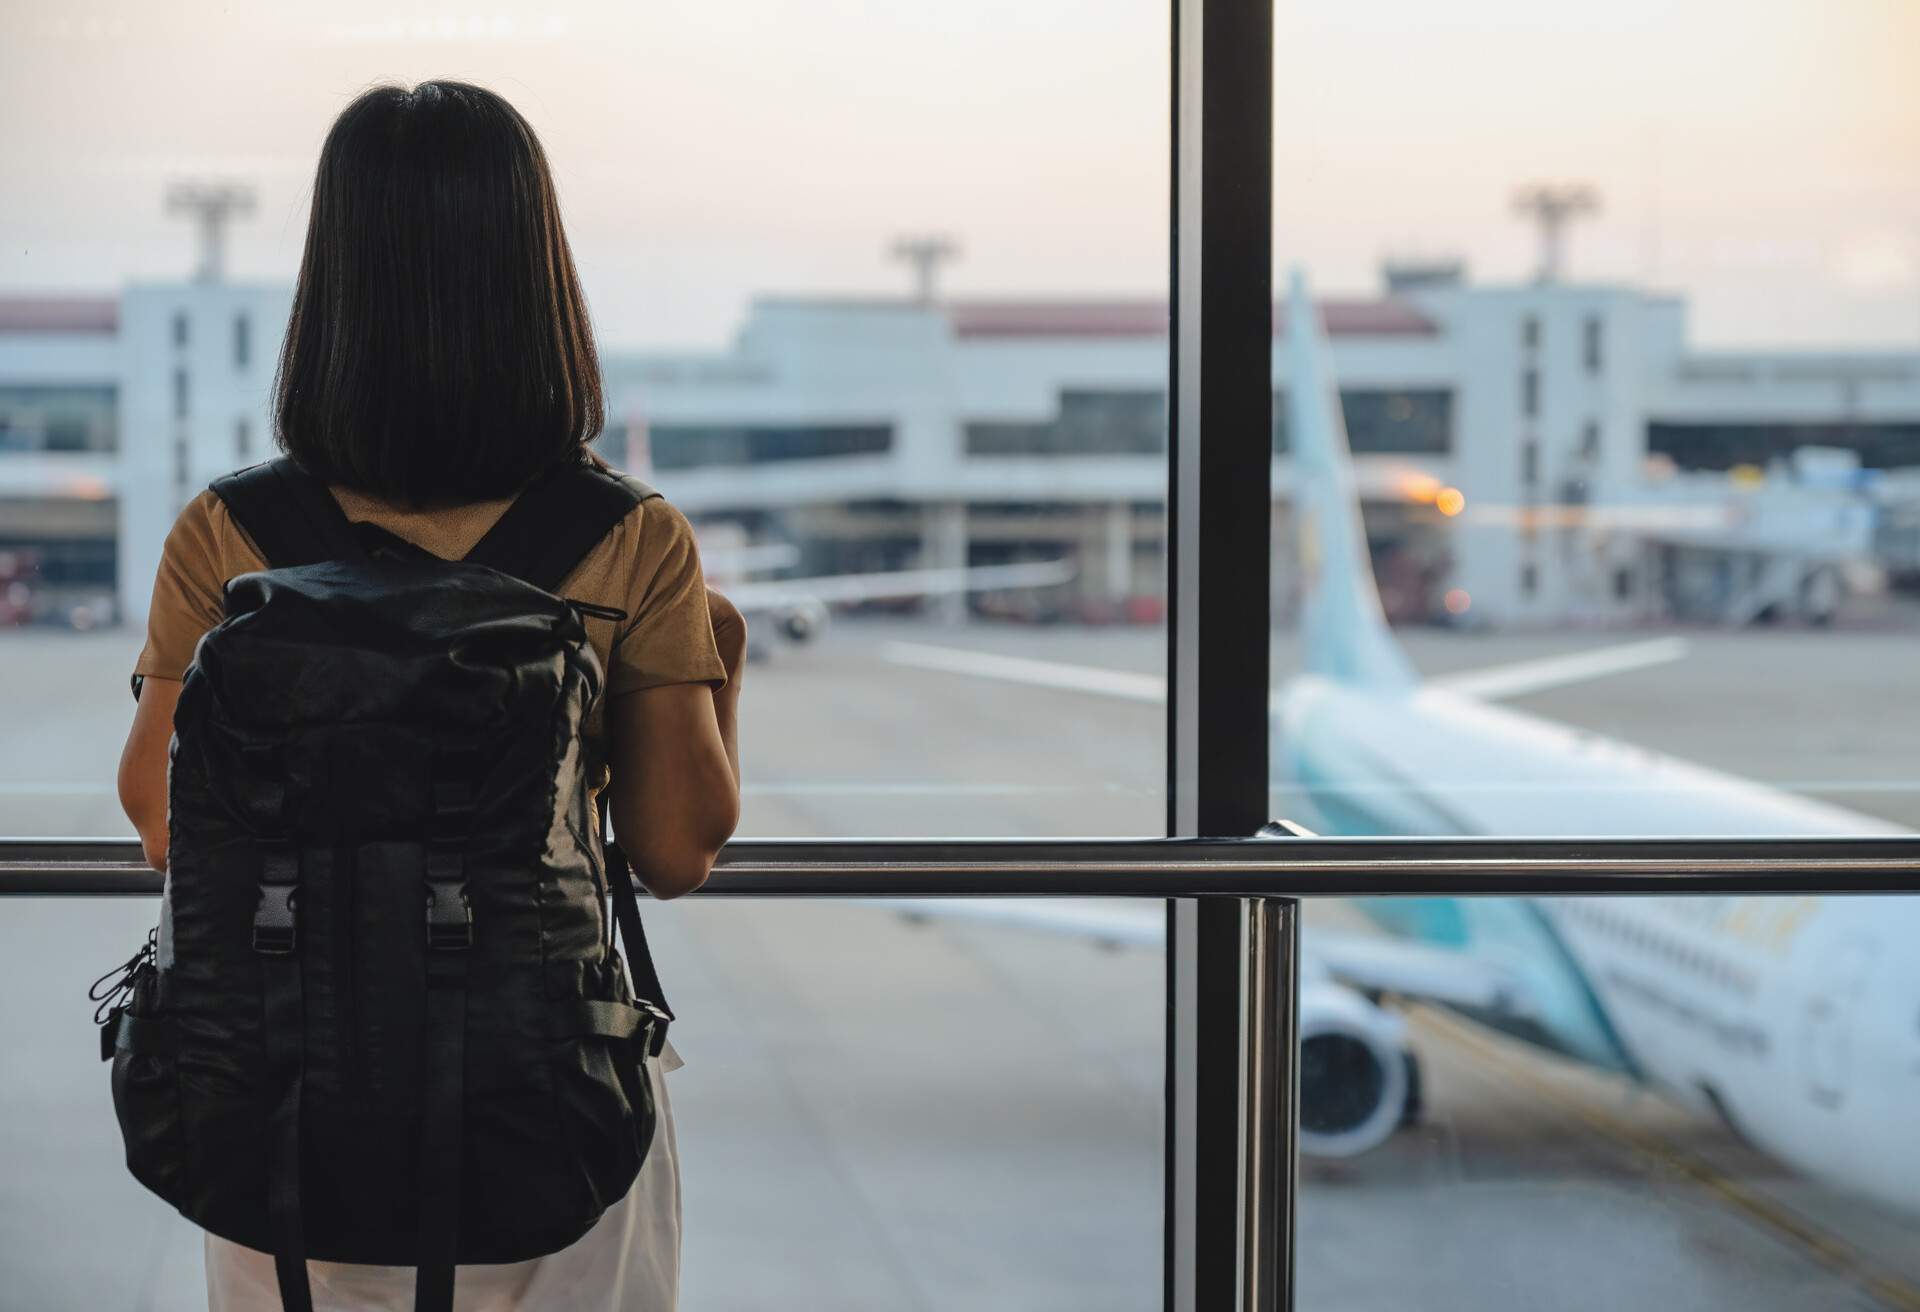 Travel tourist standing with luggage watching sunset at airport window. Woman looking at lounge looking at airplanes while waiting at boarding gate before departure.